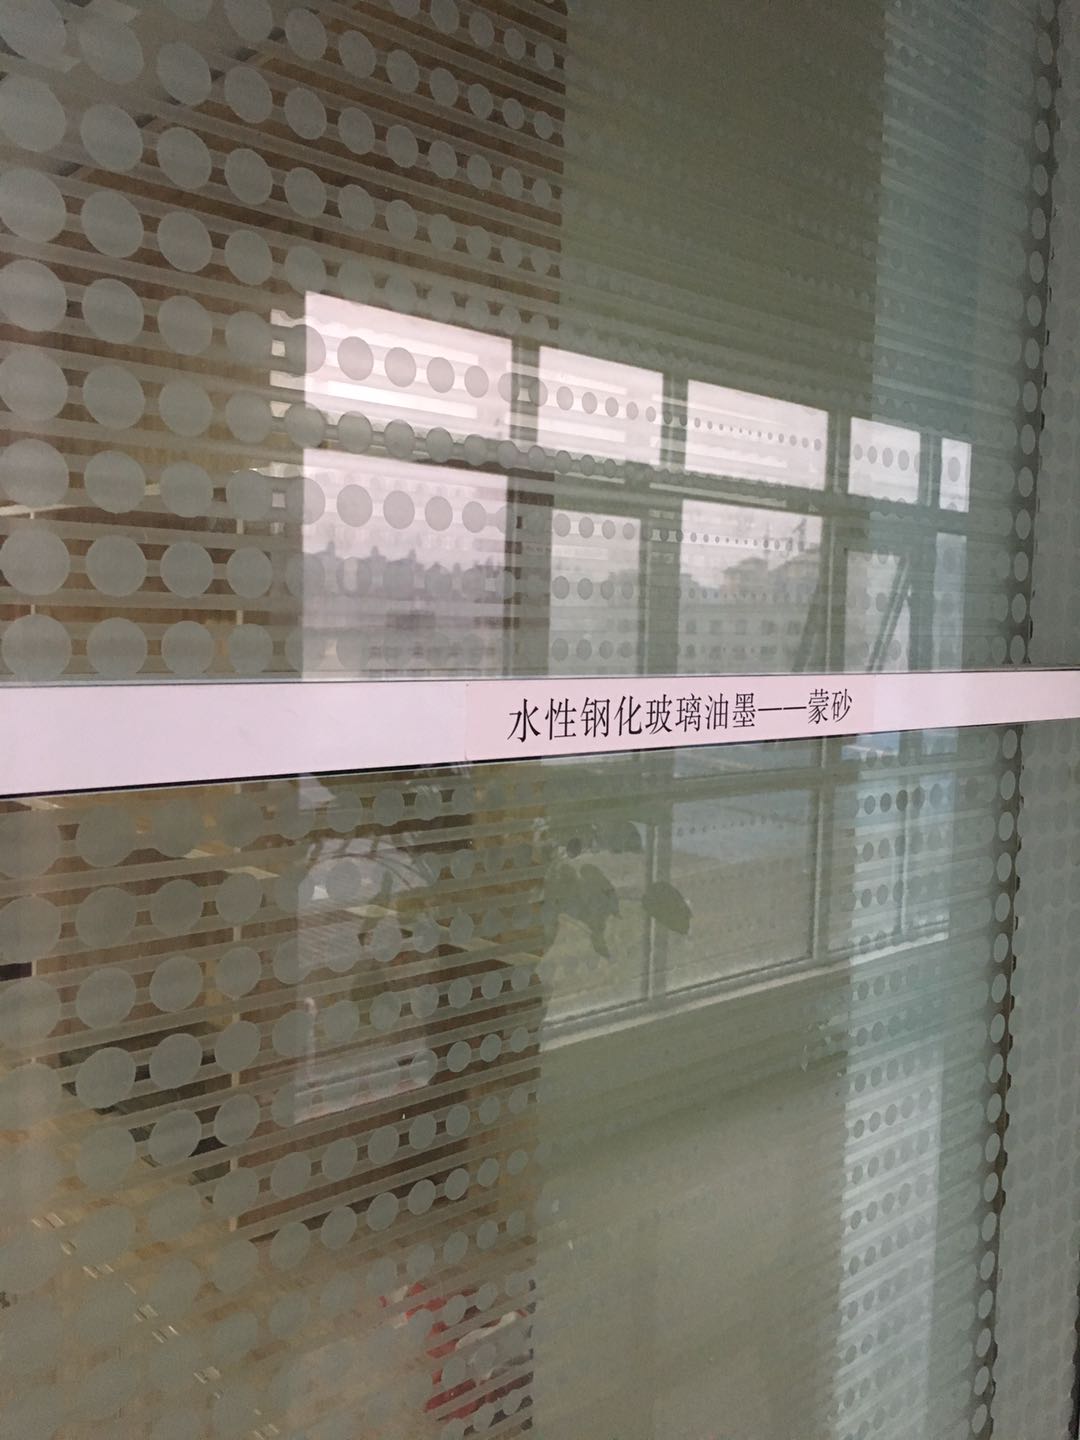 Application of the tempered glass ink on indoor partitions